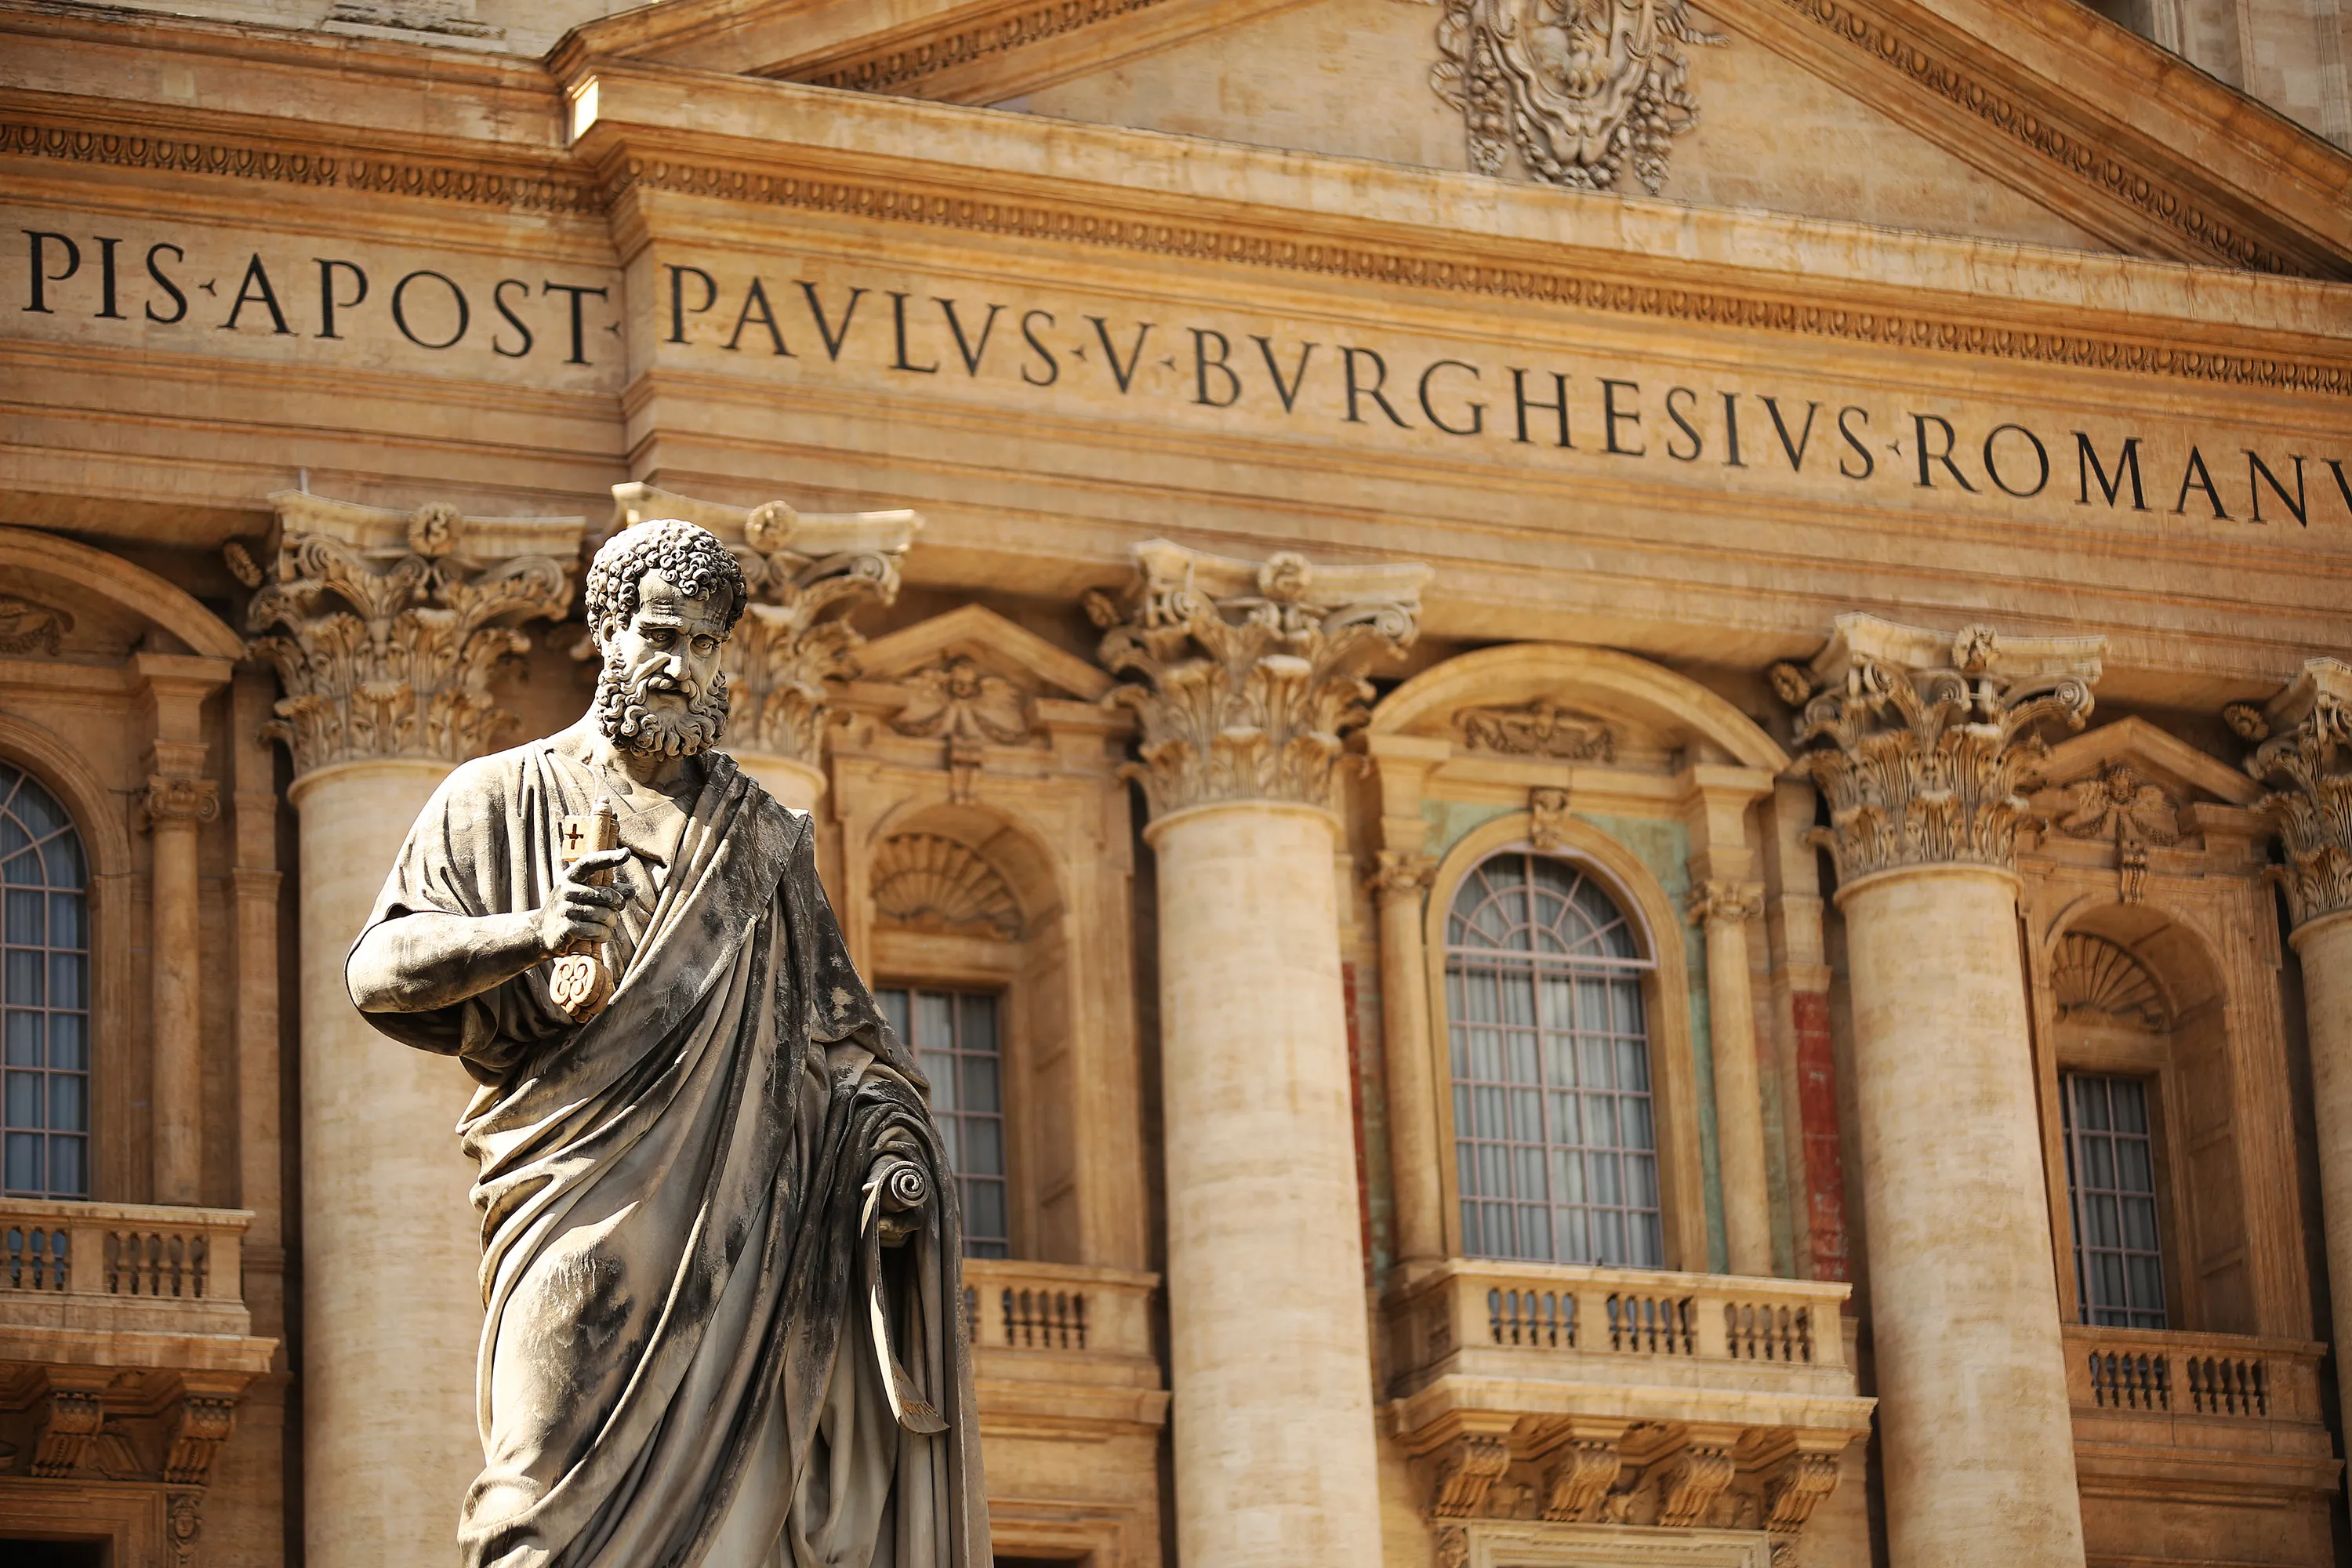 Statue of St. Peter in front of St. Peter's Basilica.?w=200&h=150